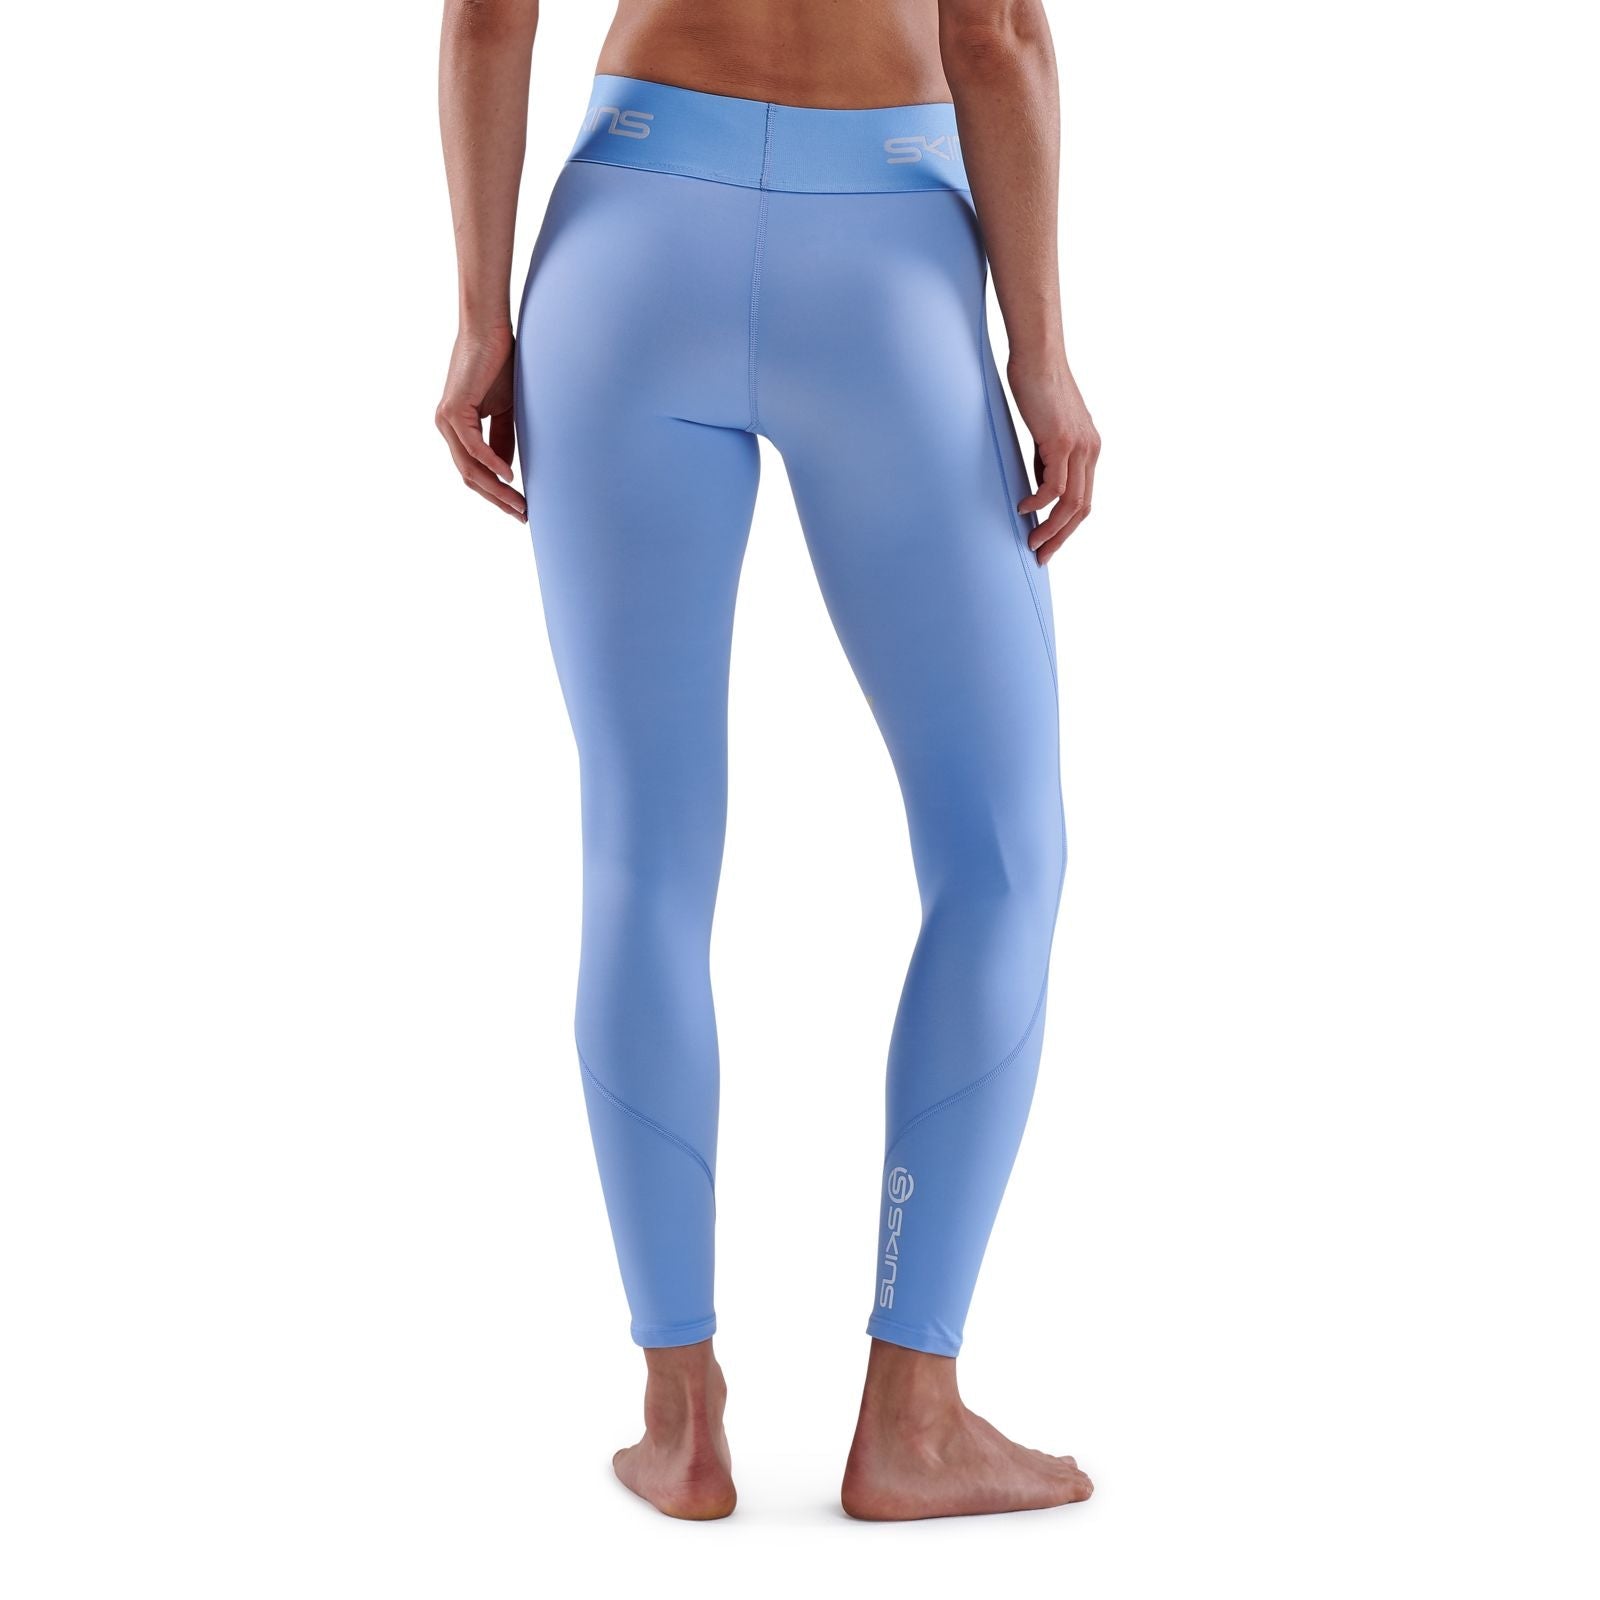 Skins A200 Men's Active Thermal Compression Long Tights Black/Neon Blue